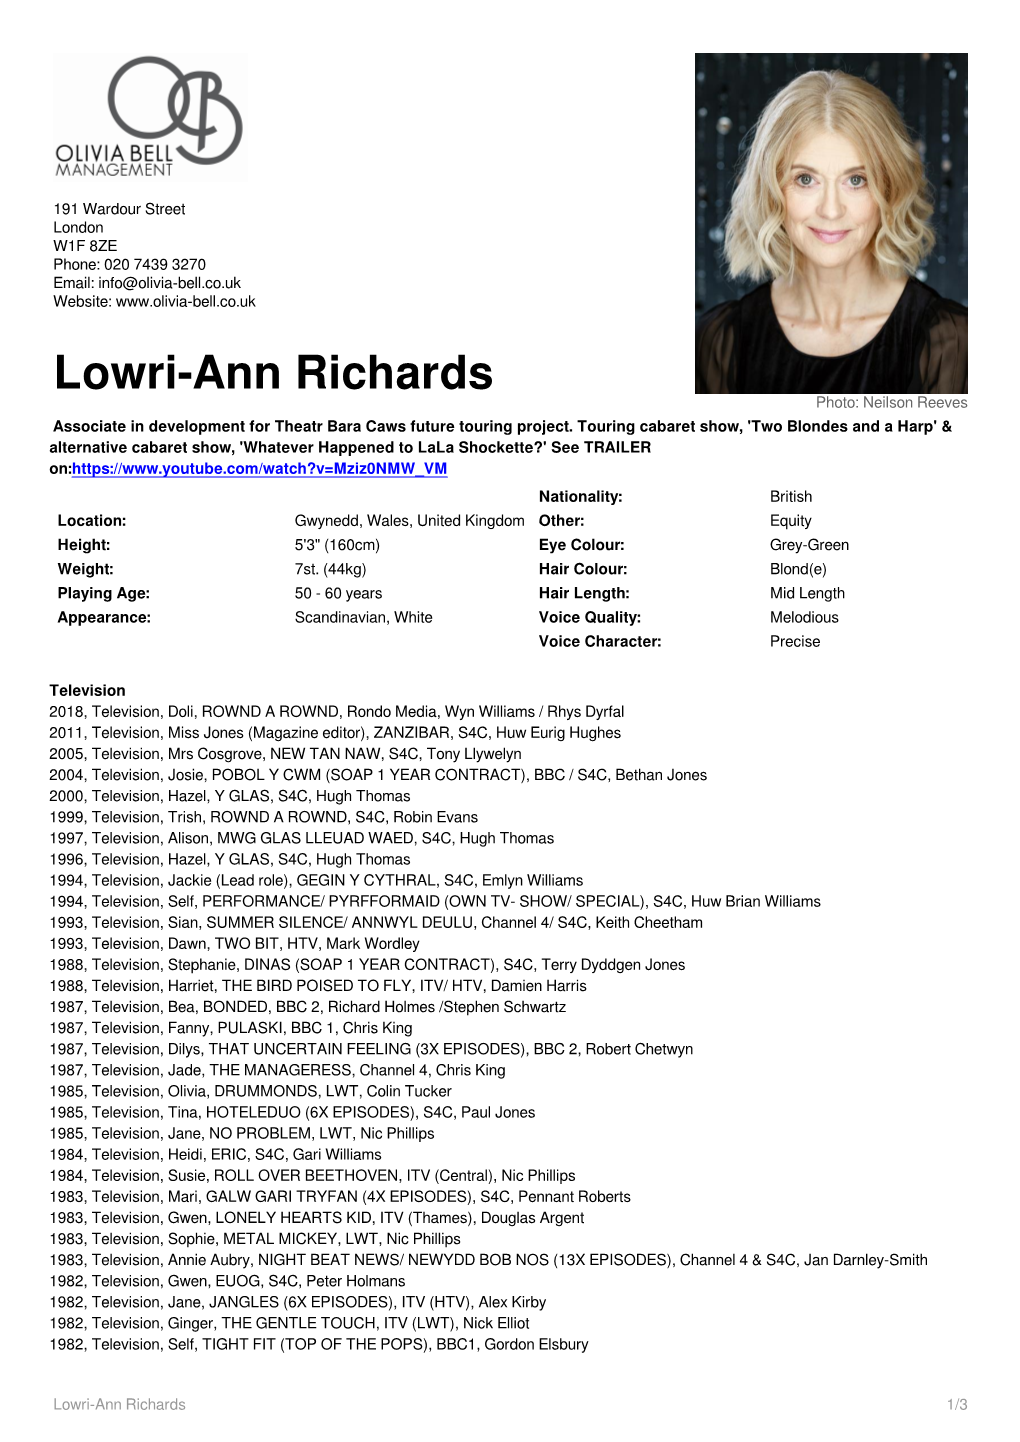 Lowri-Ann Richards Photo: Neilson Reeves Associate in Development for Theatr Bara Caws Future Touring Project